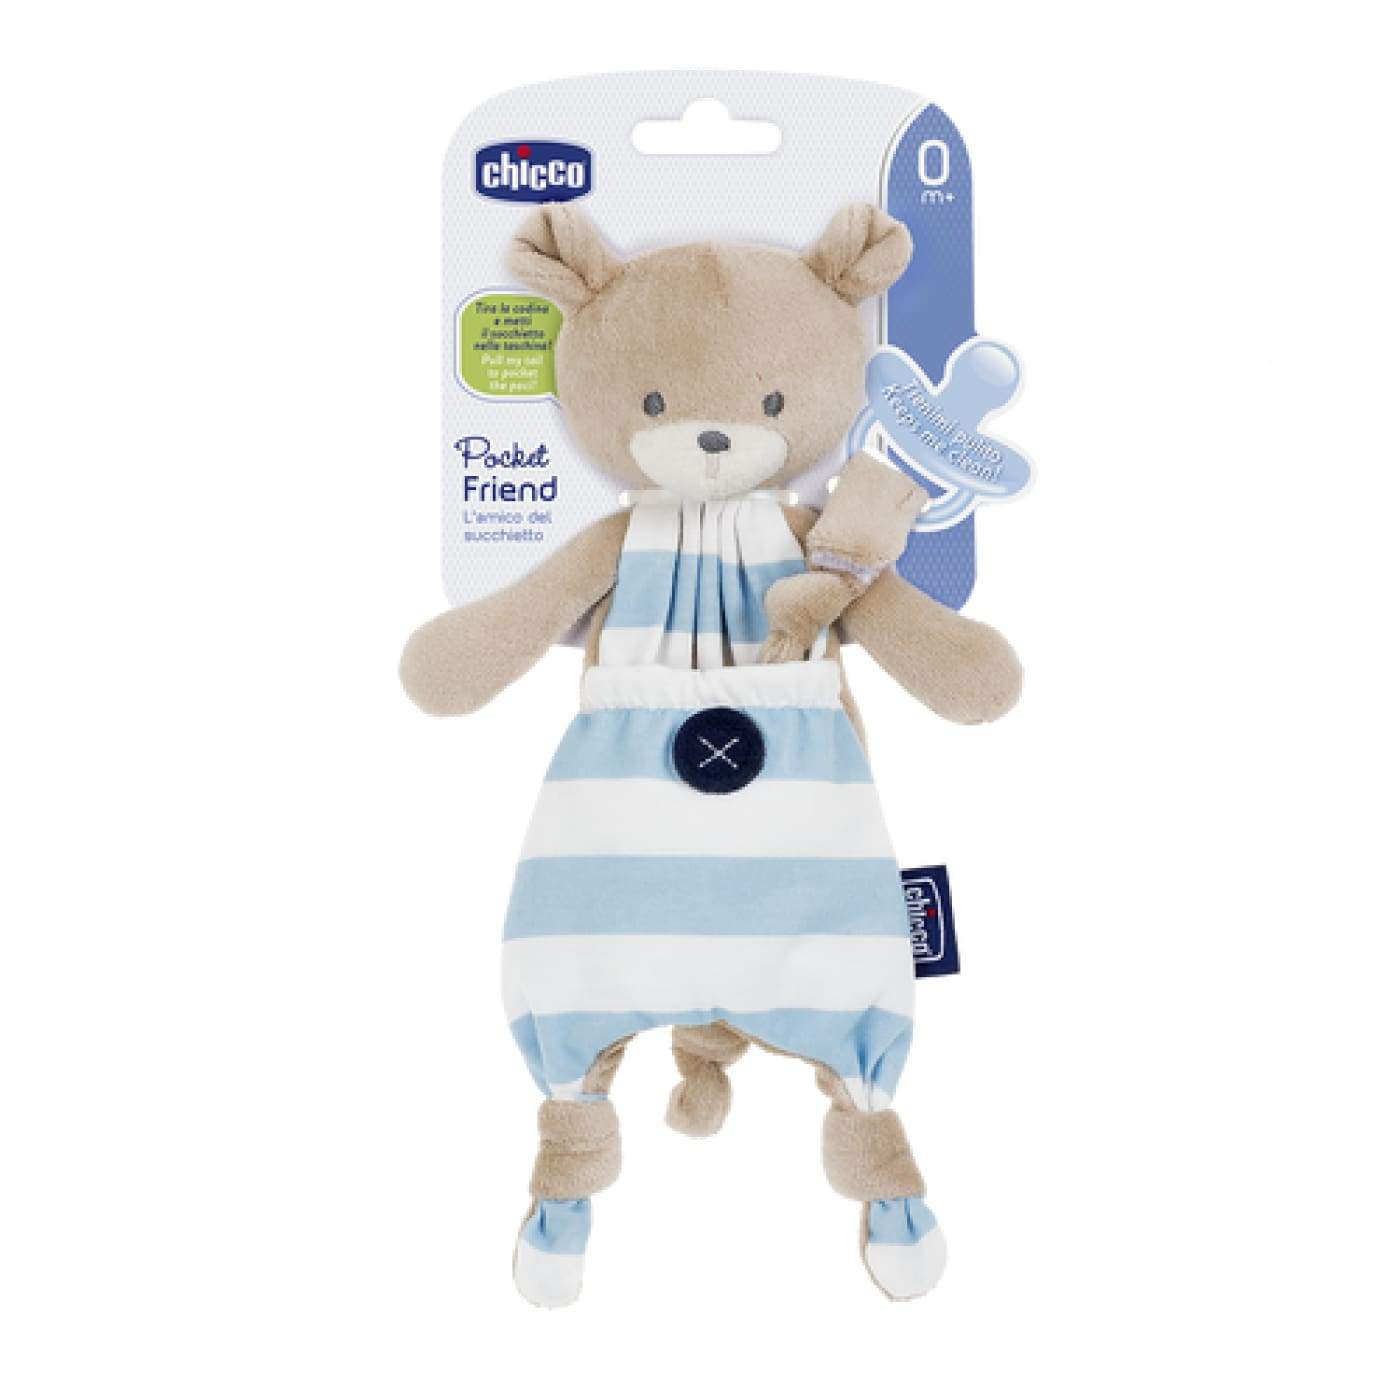 Chicco Pocket Friend - Blue - TOYS & PLAY - BLANKIES/COMFORTERS/RATTLES